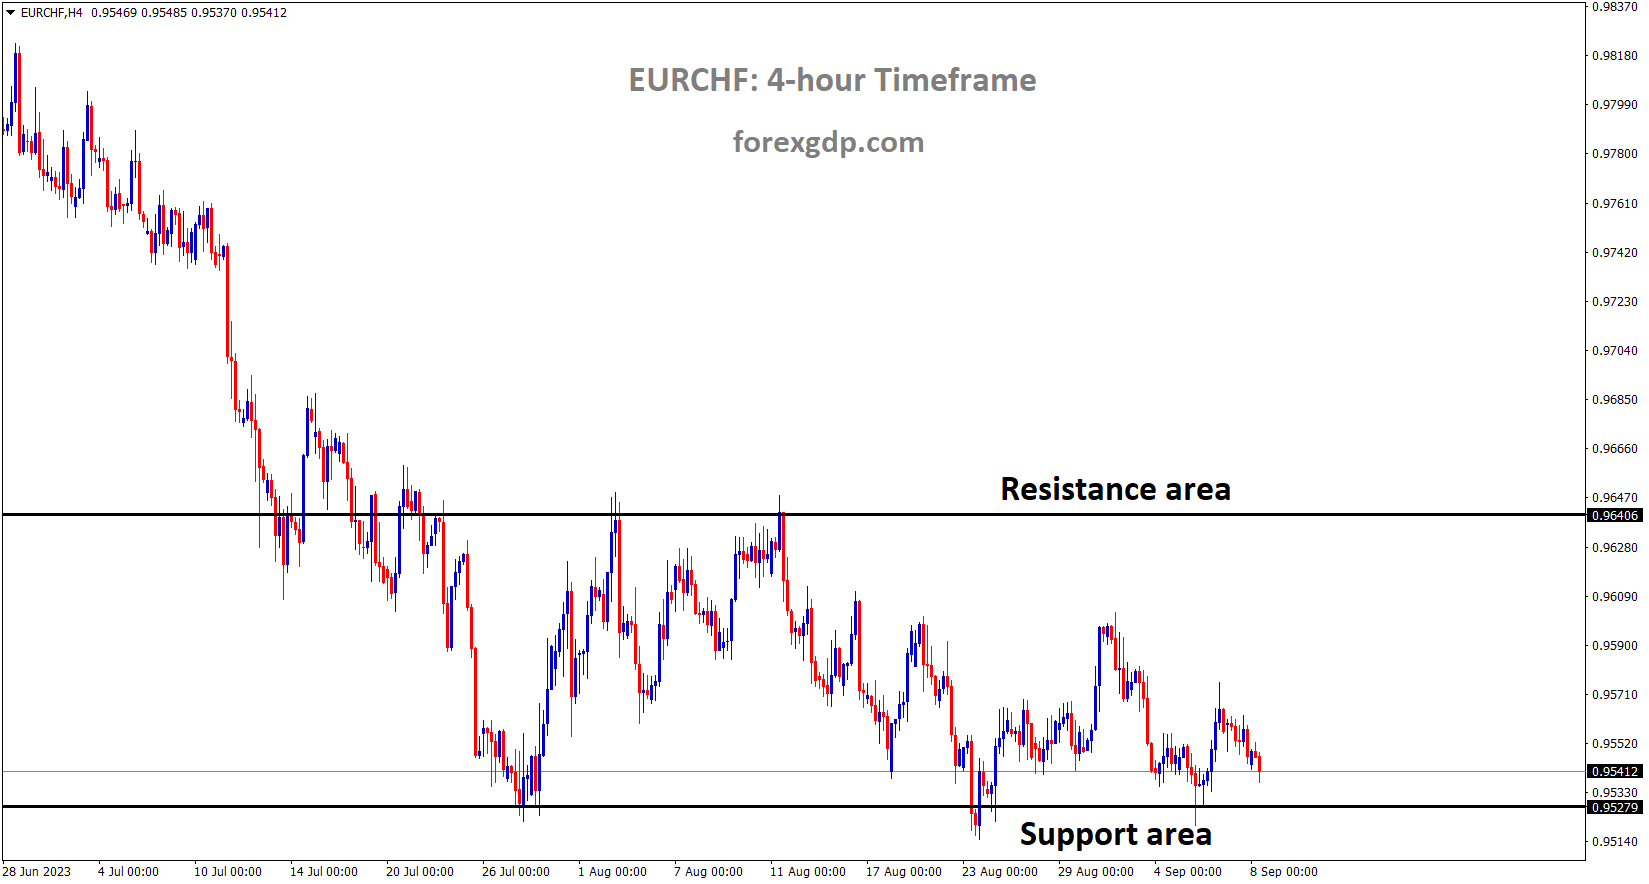 EURCHF is moving in the Box pattern and the market has reached the horizontal support area of the pattern